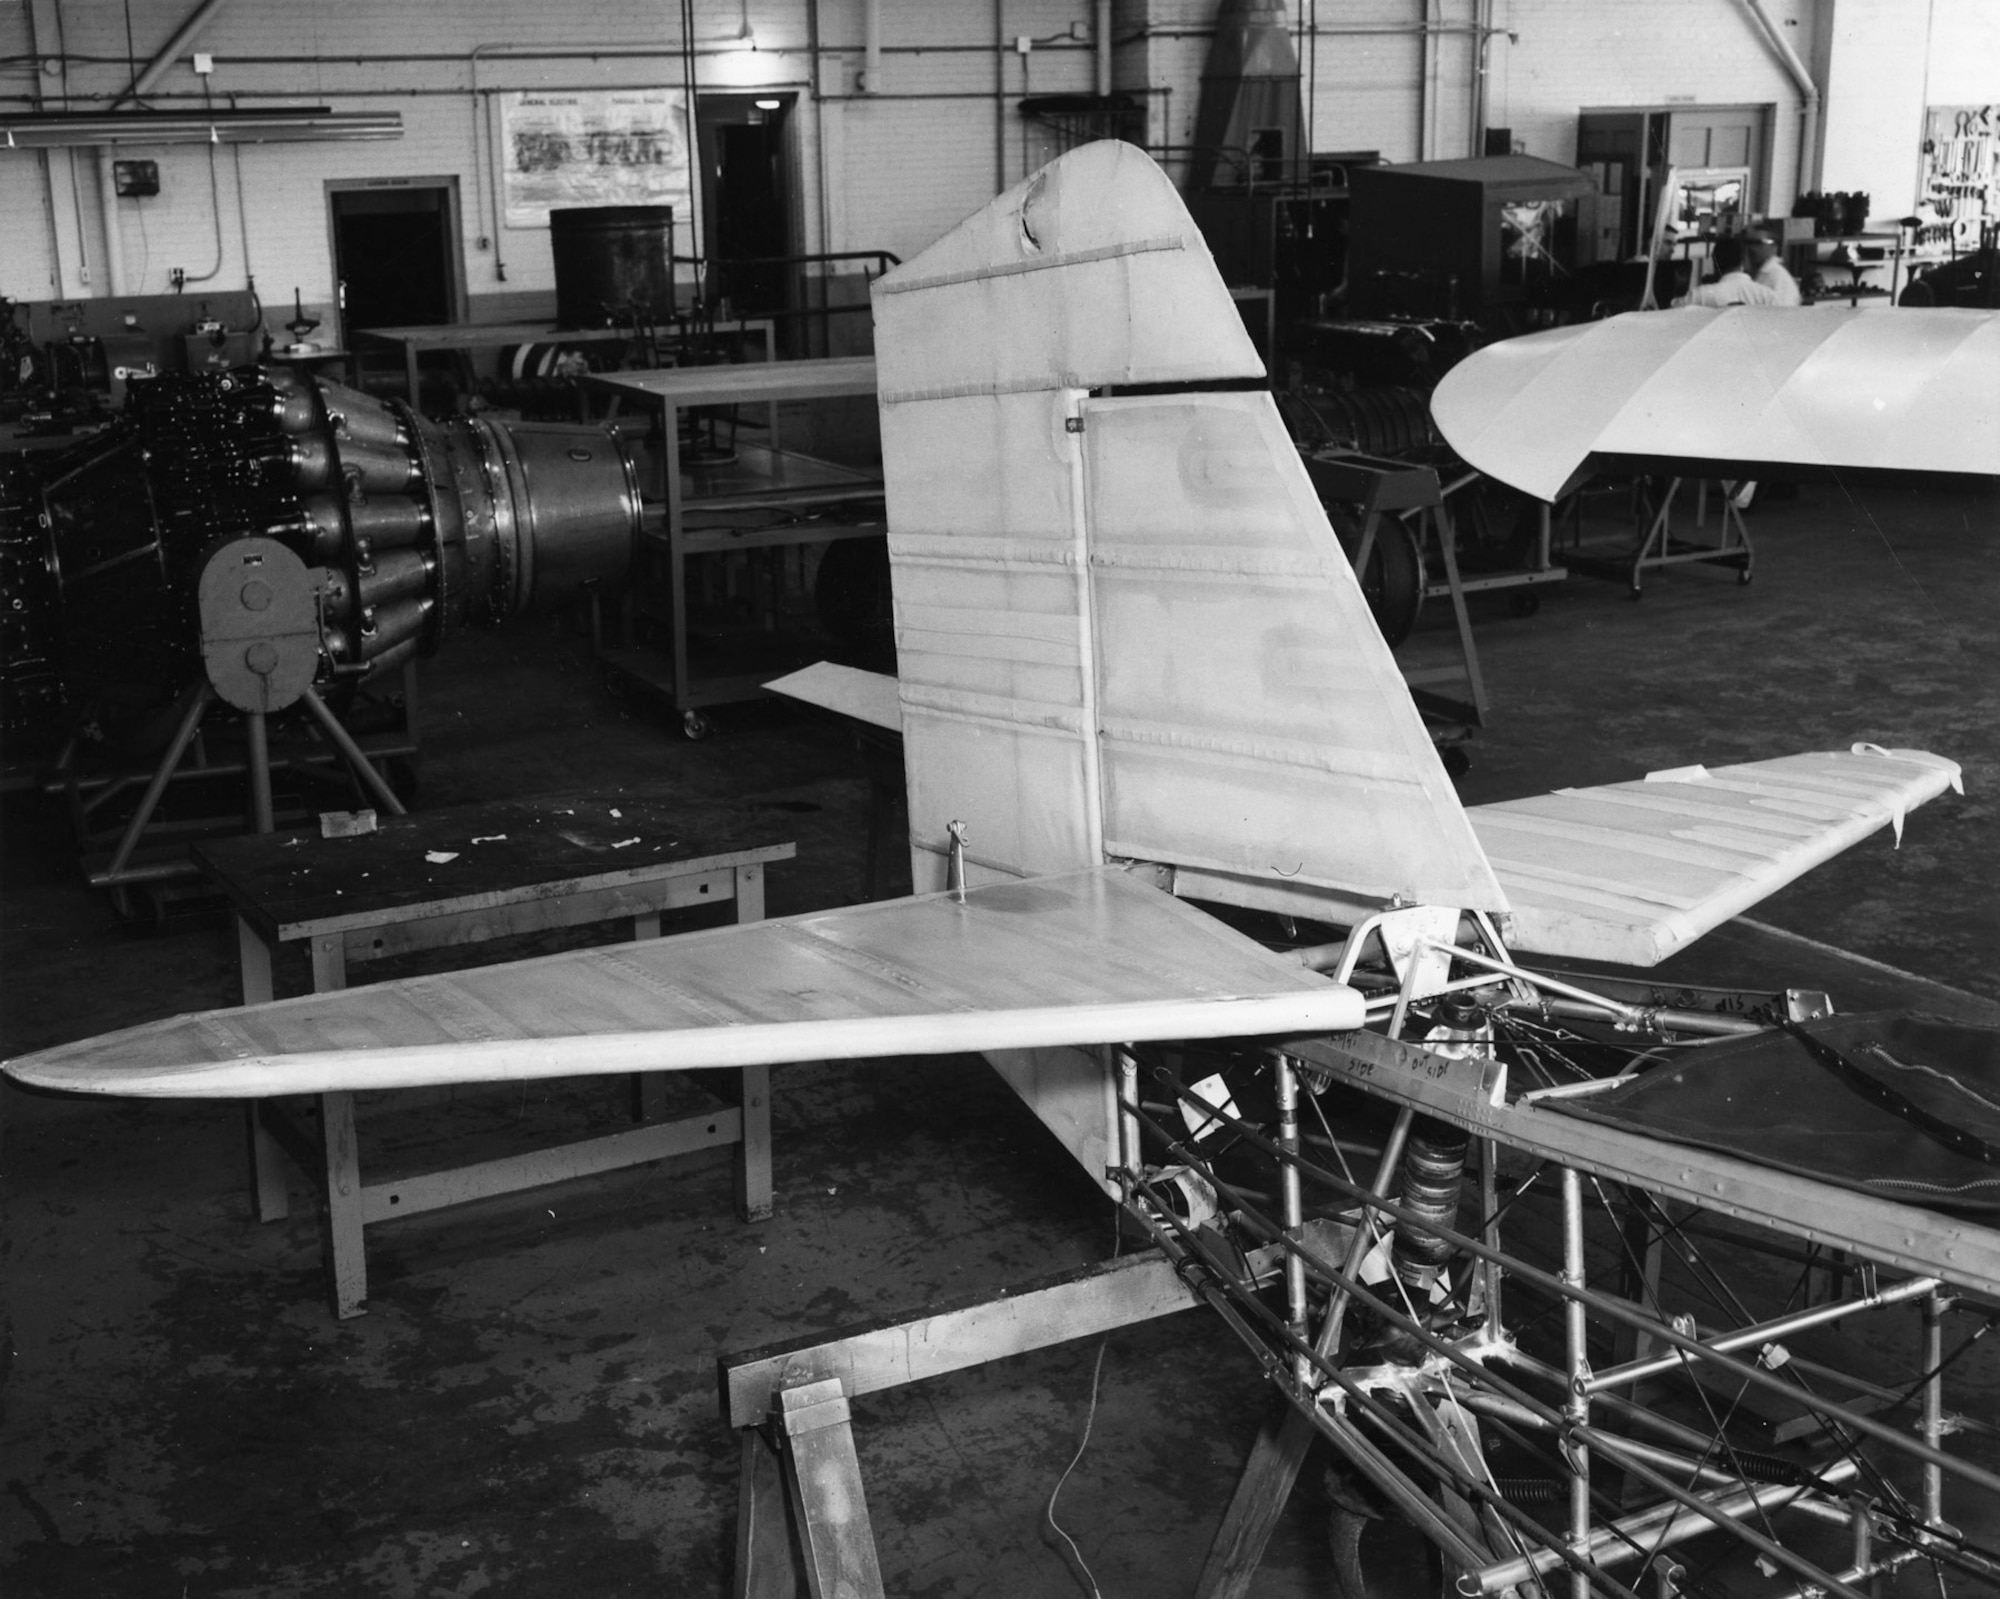 The museum's P-6E airframe was restored by the Department of Aviation Technology at Purdue University in 1963. (U.S. Air Force photo)